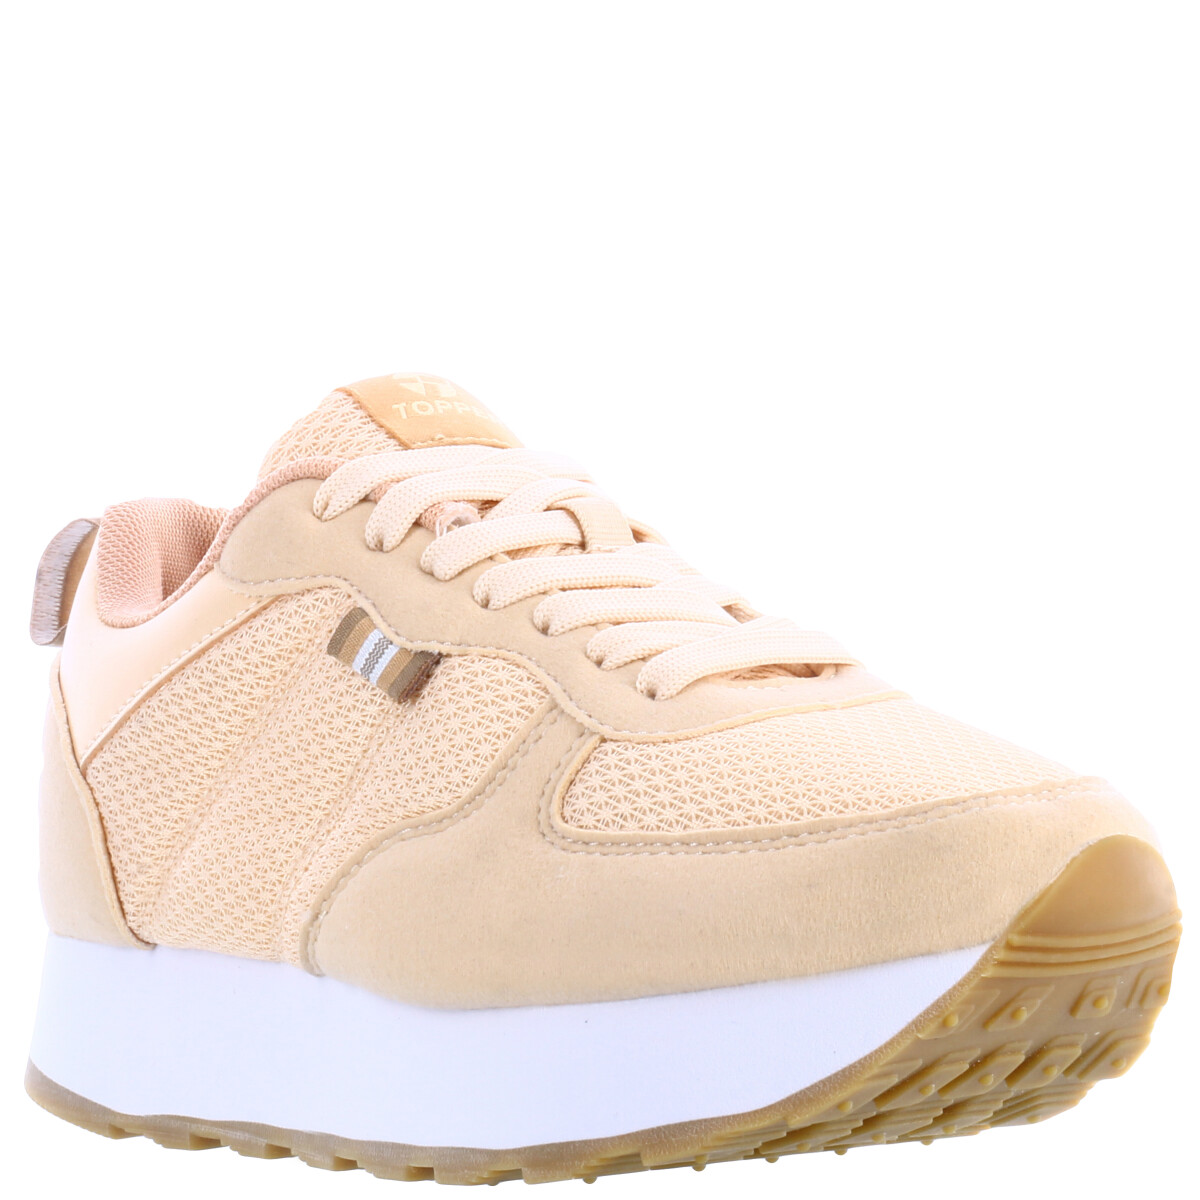 T.350 Wedge Topper - Nude/Crema 